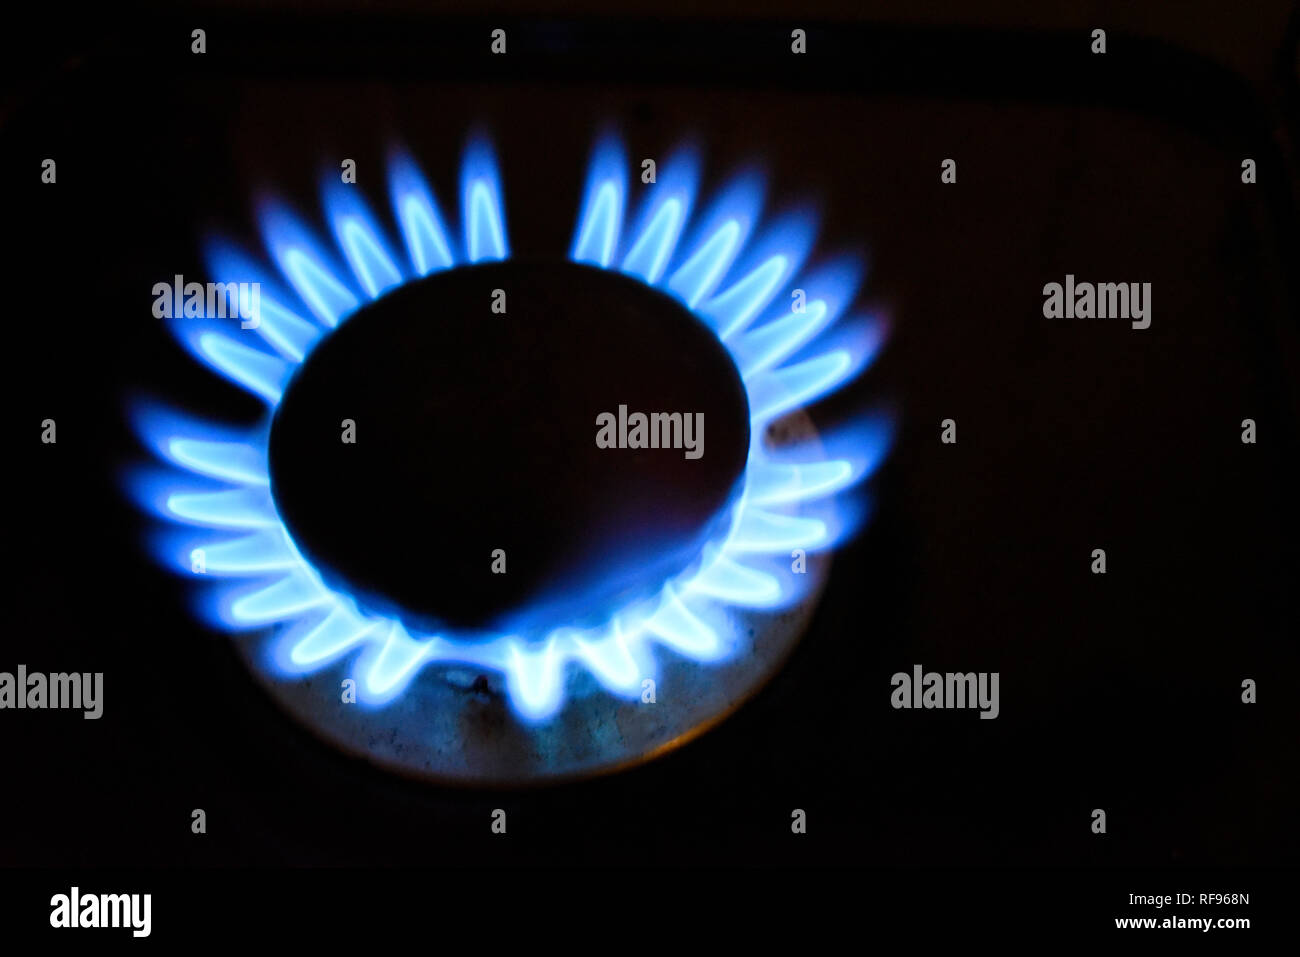 Gas hob flame. Blue flame from a gas powered hob alight on a black background. Blue natural gas flame from a cooker appliance. Space for copy Stock Photo